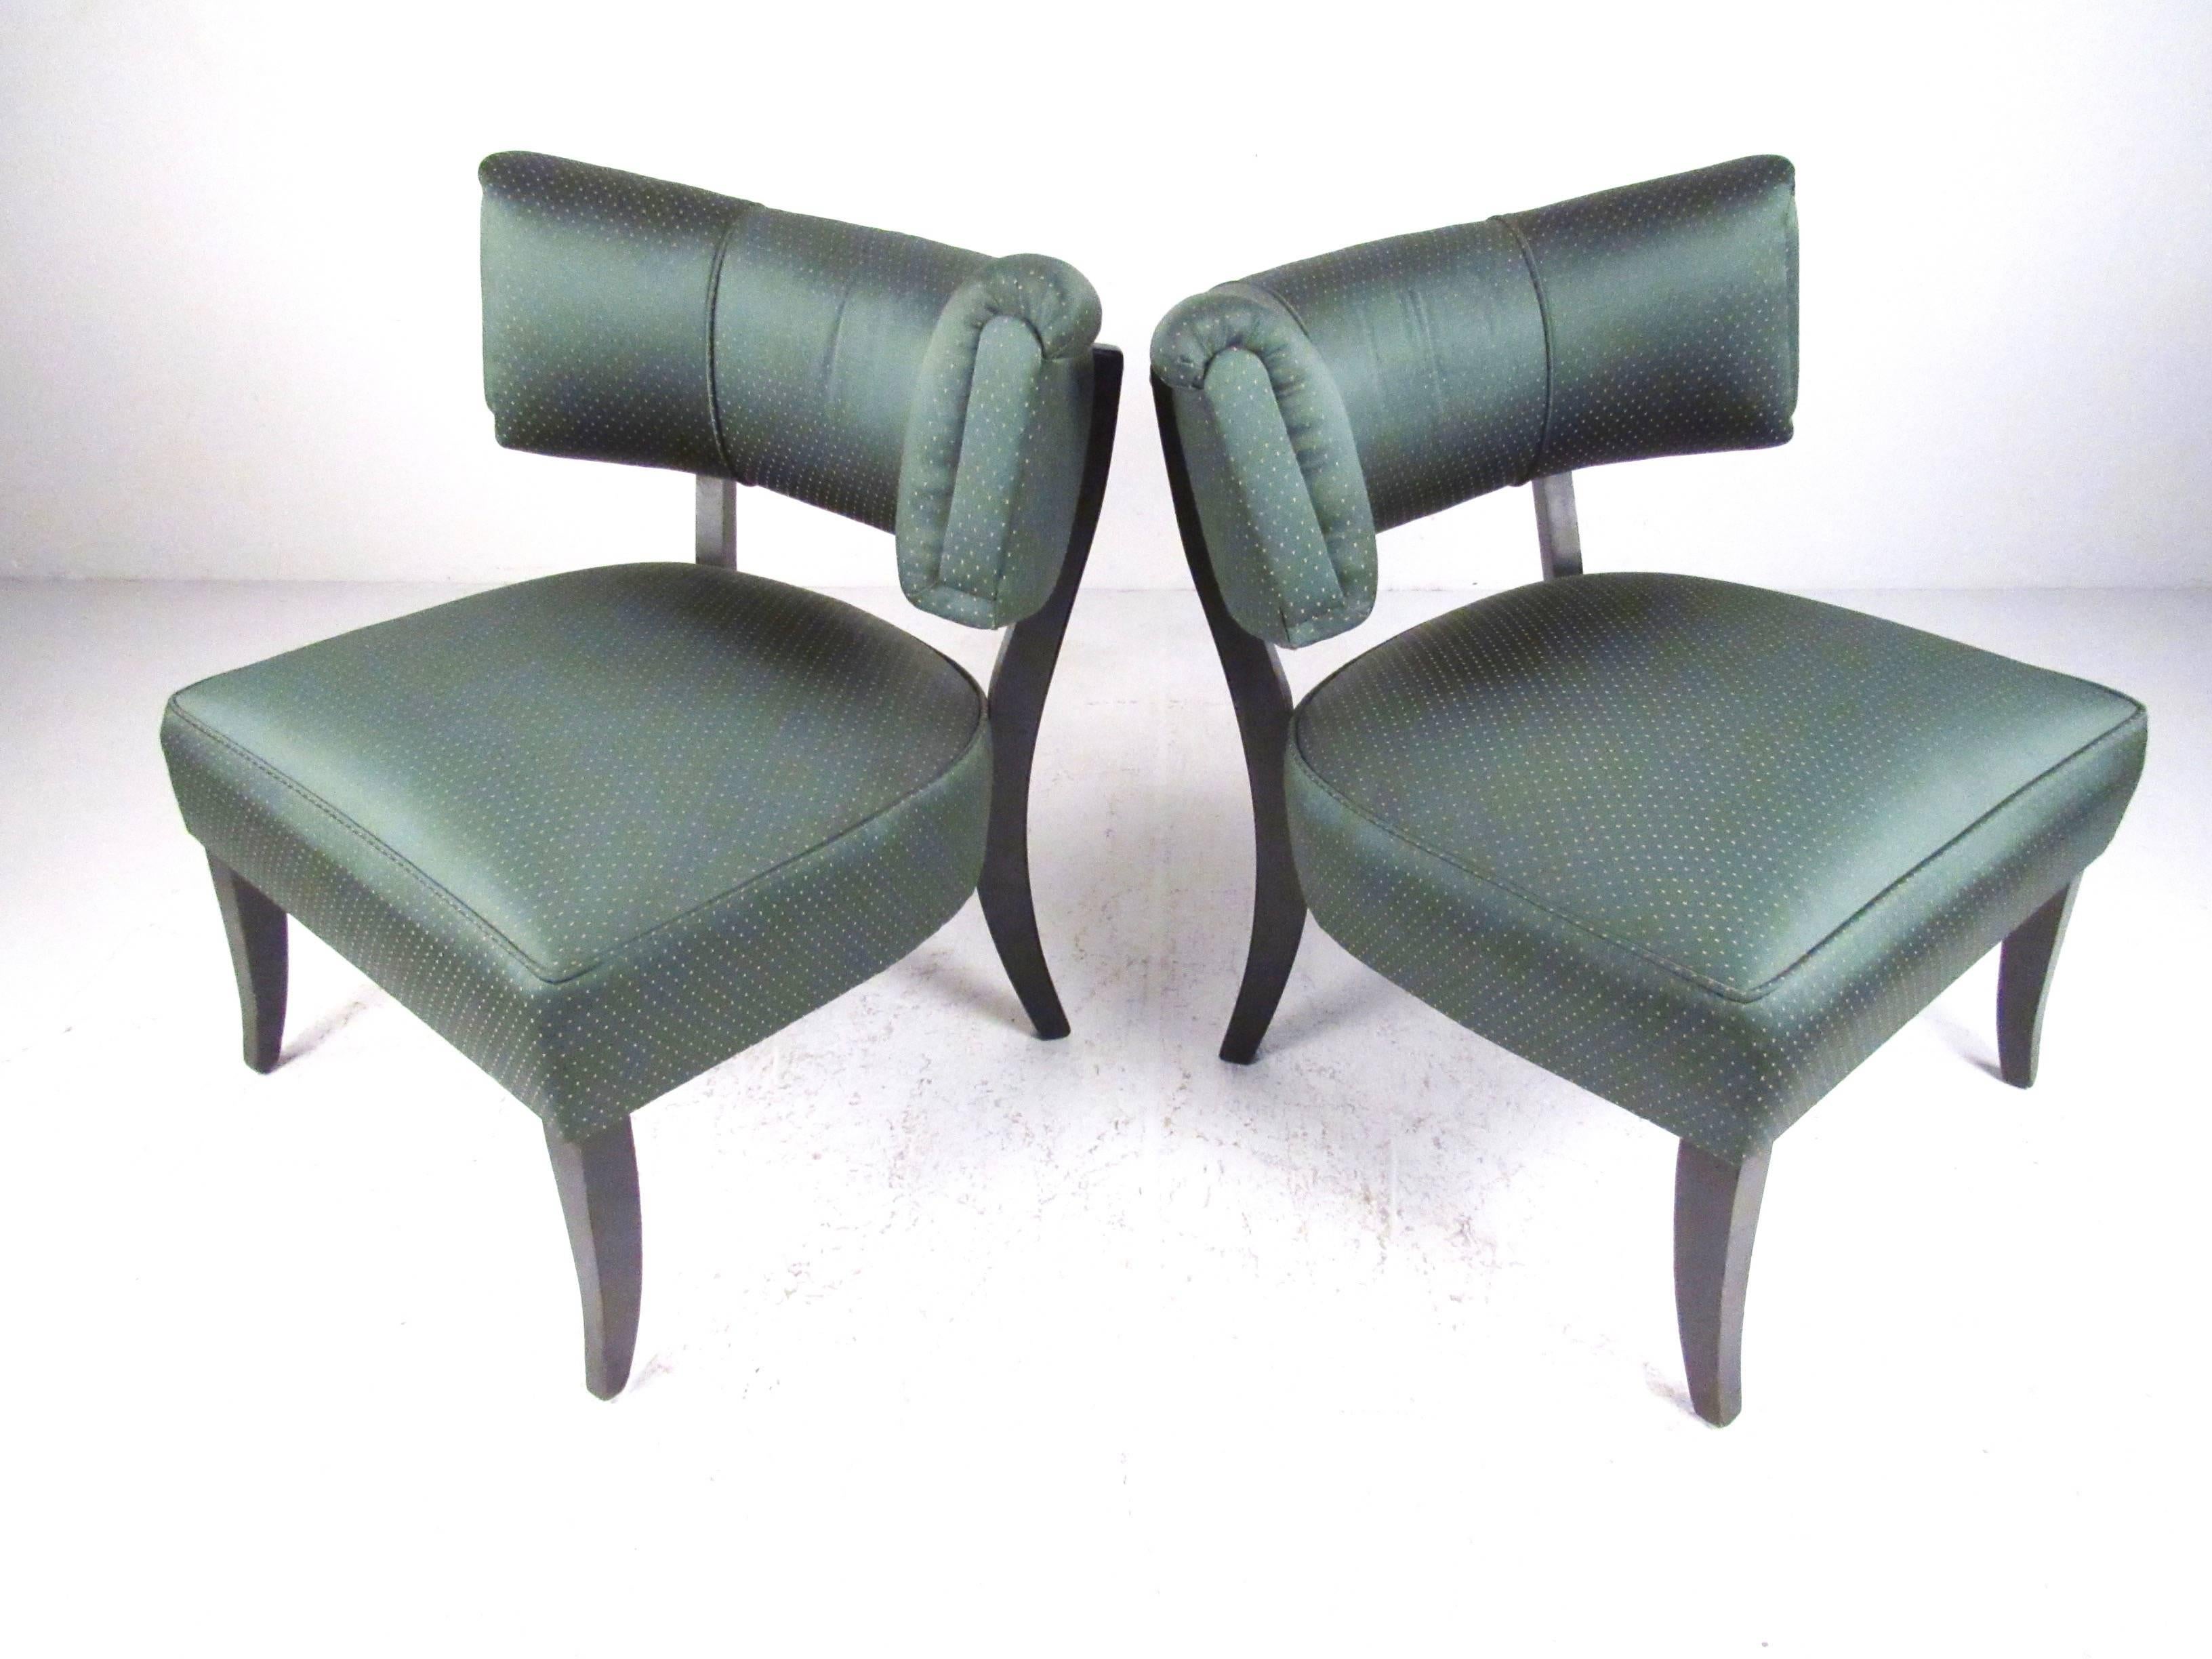 This comfortable pair of barrel back slipper chairs makes an elegant yet simple statement in home or office. Plush upholstery, shapely design, and curved hardwood legs add to the vintage Art Deco style of the matching pair. Please confirm item